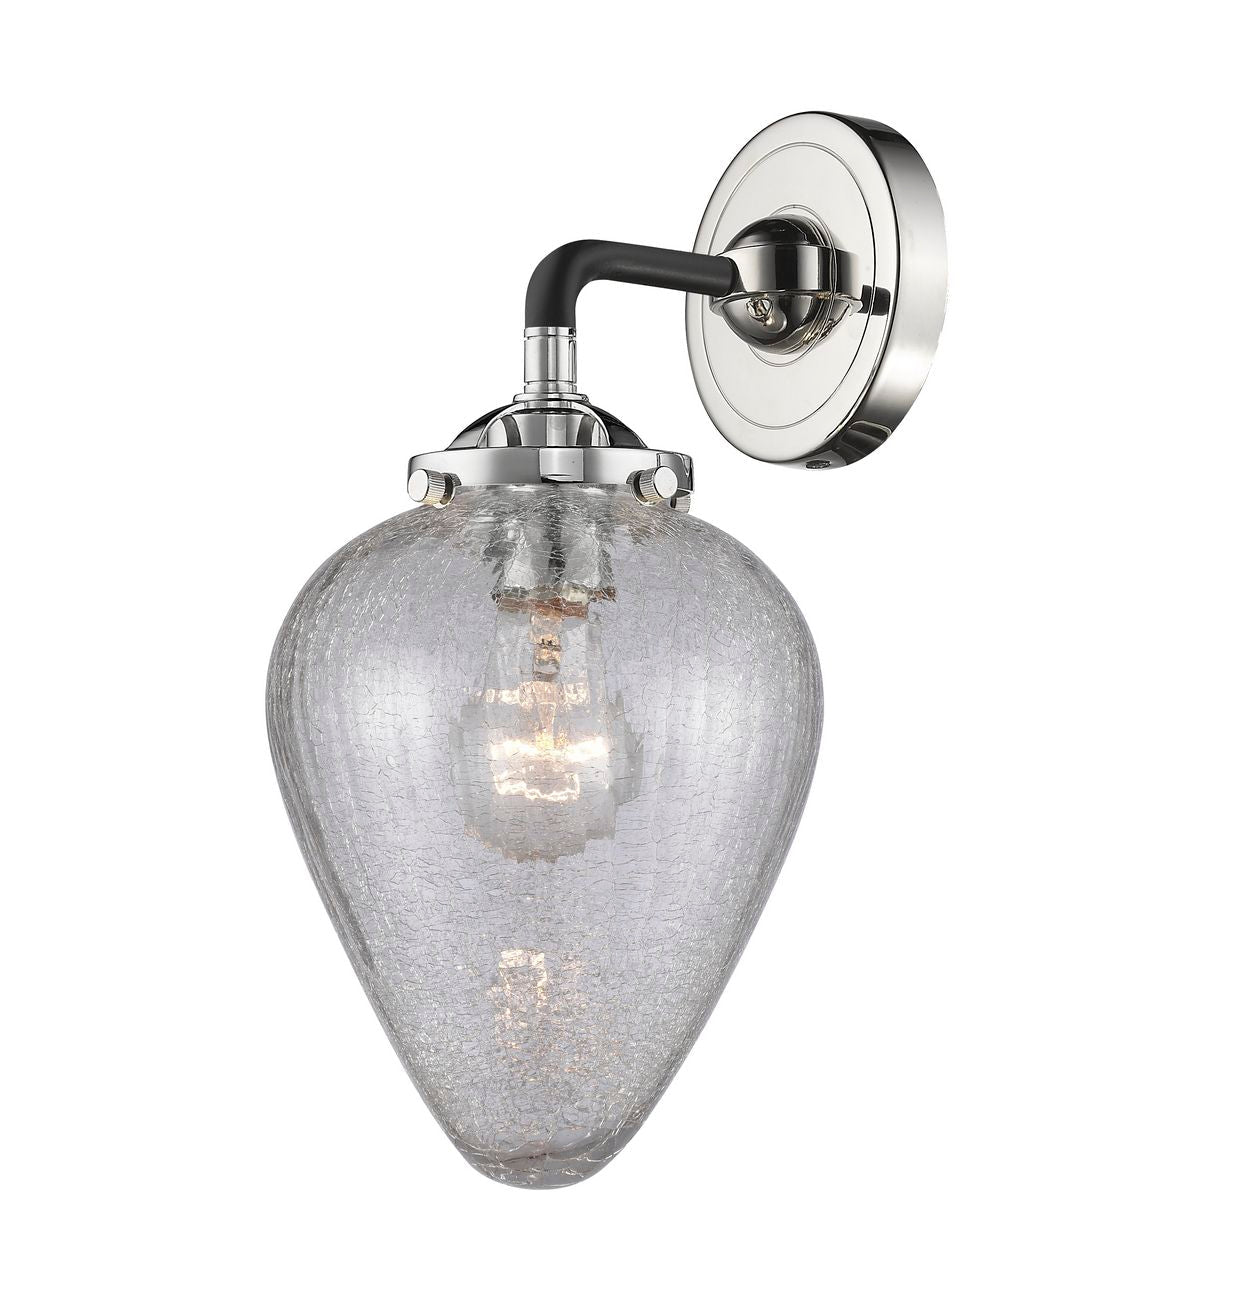 1-Light 6.5" Geneseo Sconce - Teardrop Clear Crackled Glass - Choice of Finish And Incandesent Or LED Bulbs